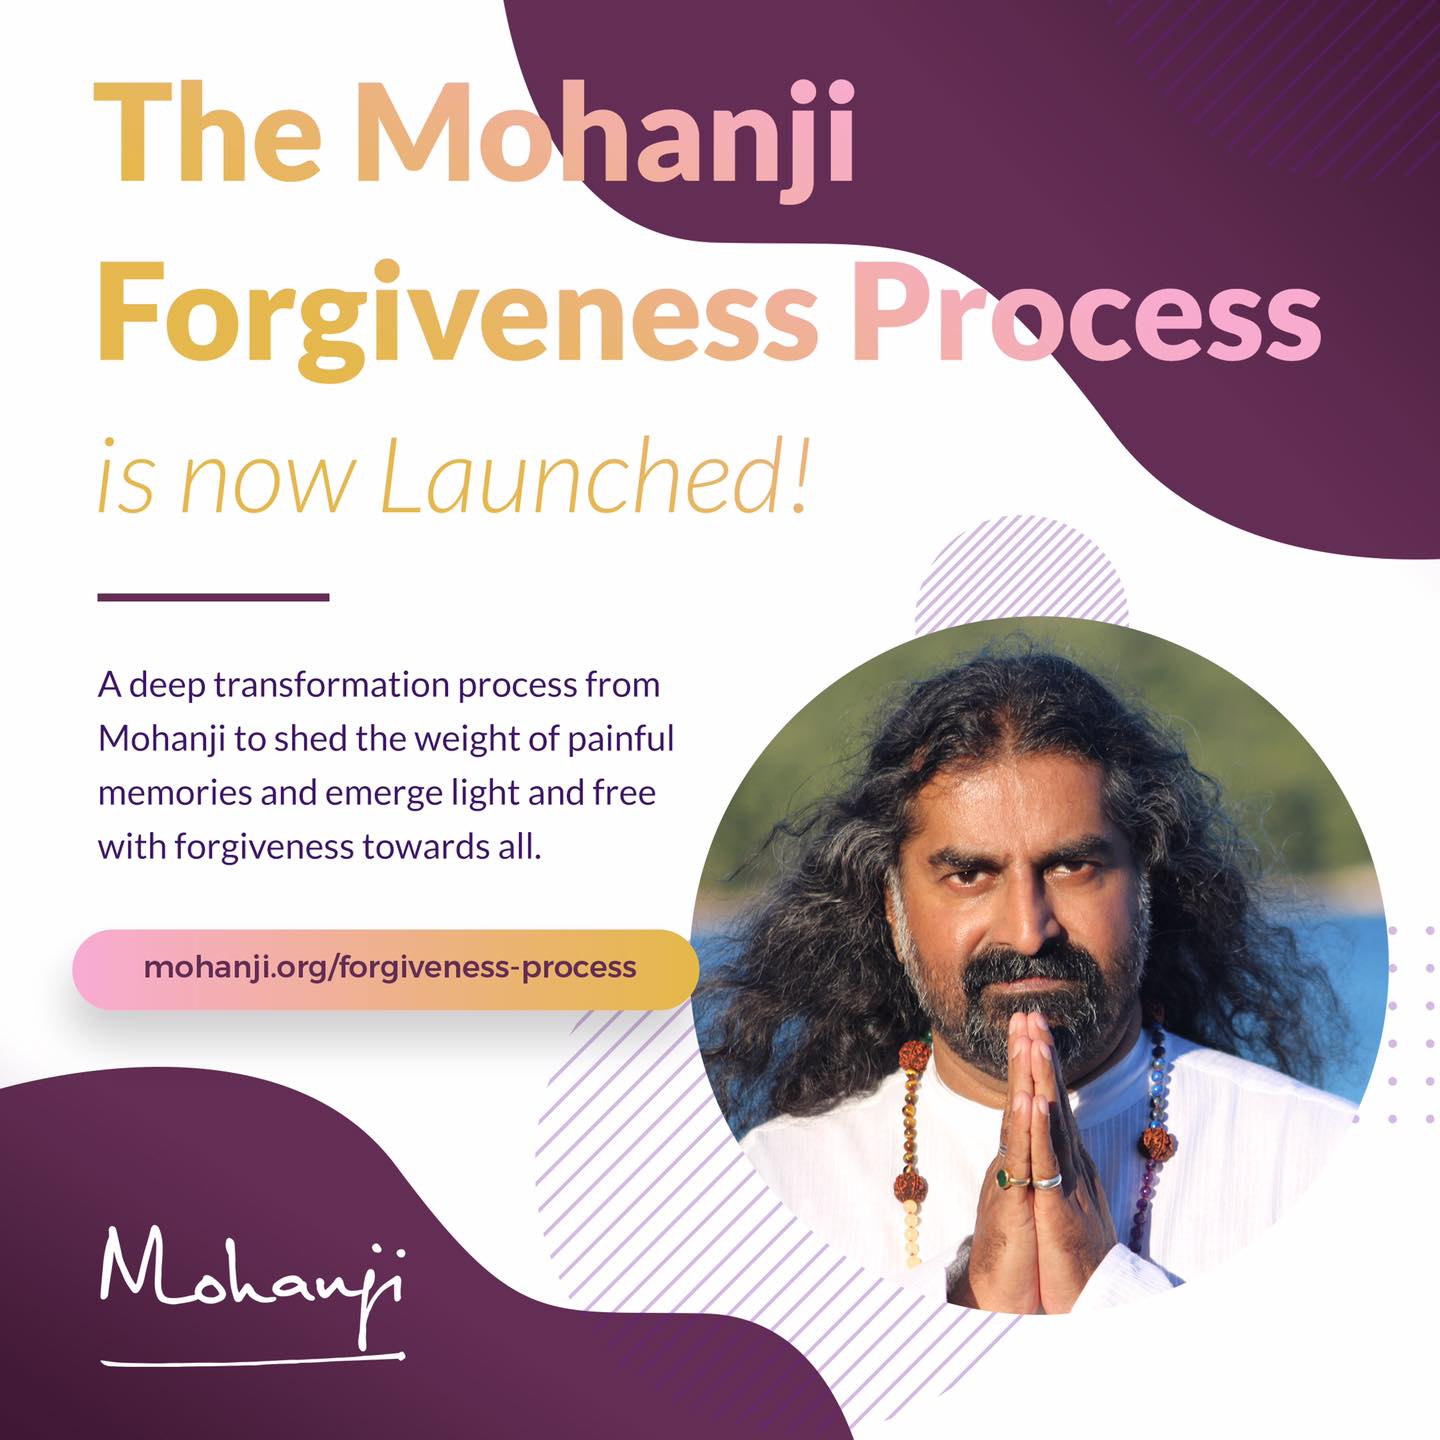 The Mohanji Forgiveness Process- A deep transformation process to shed the weight of painful memories and emerge light and free with forgiveness towards all.